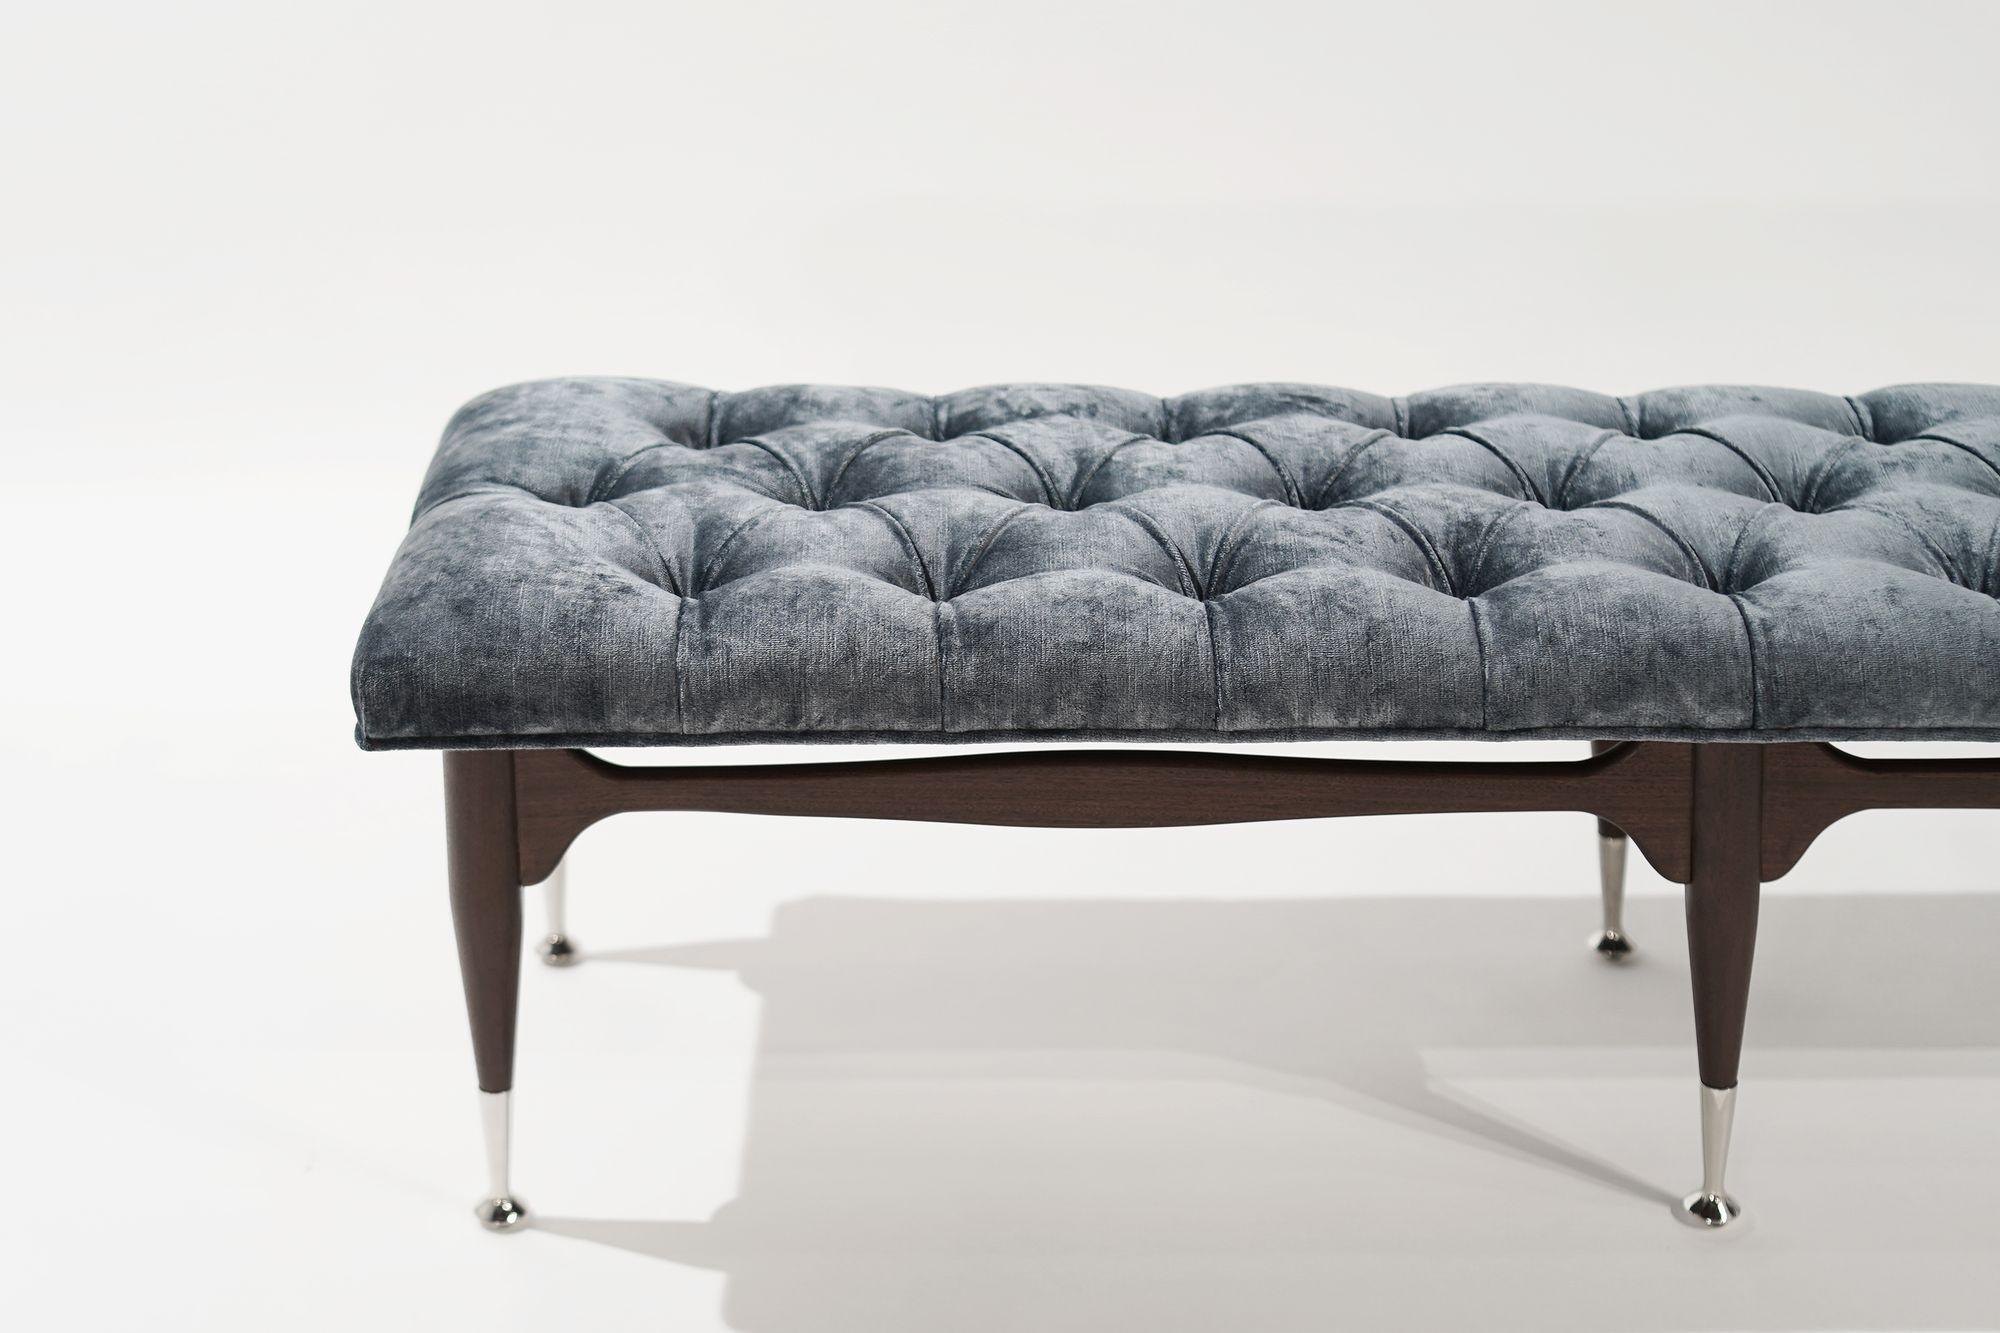 20th Century Mid Century Modern Tufted Mahogany Bench, C. 1950s For Sale